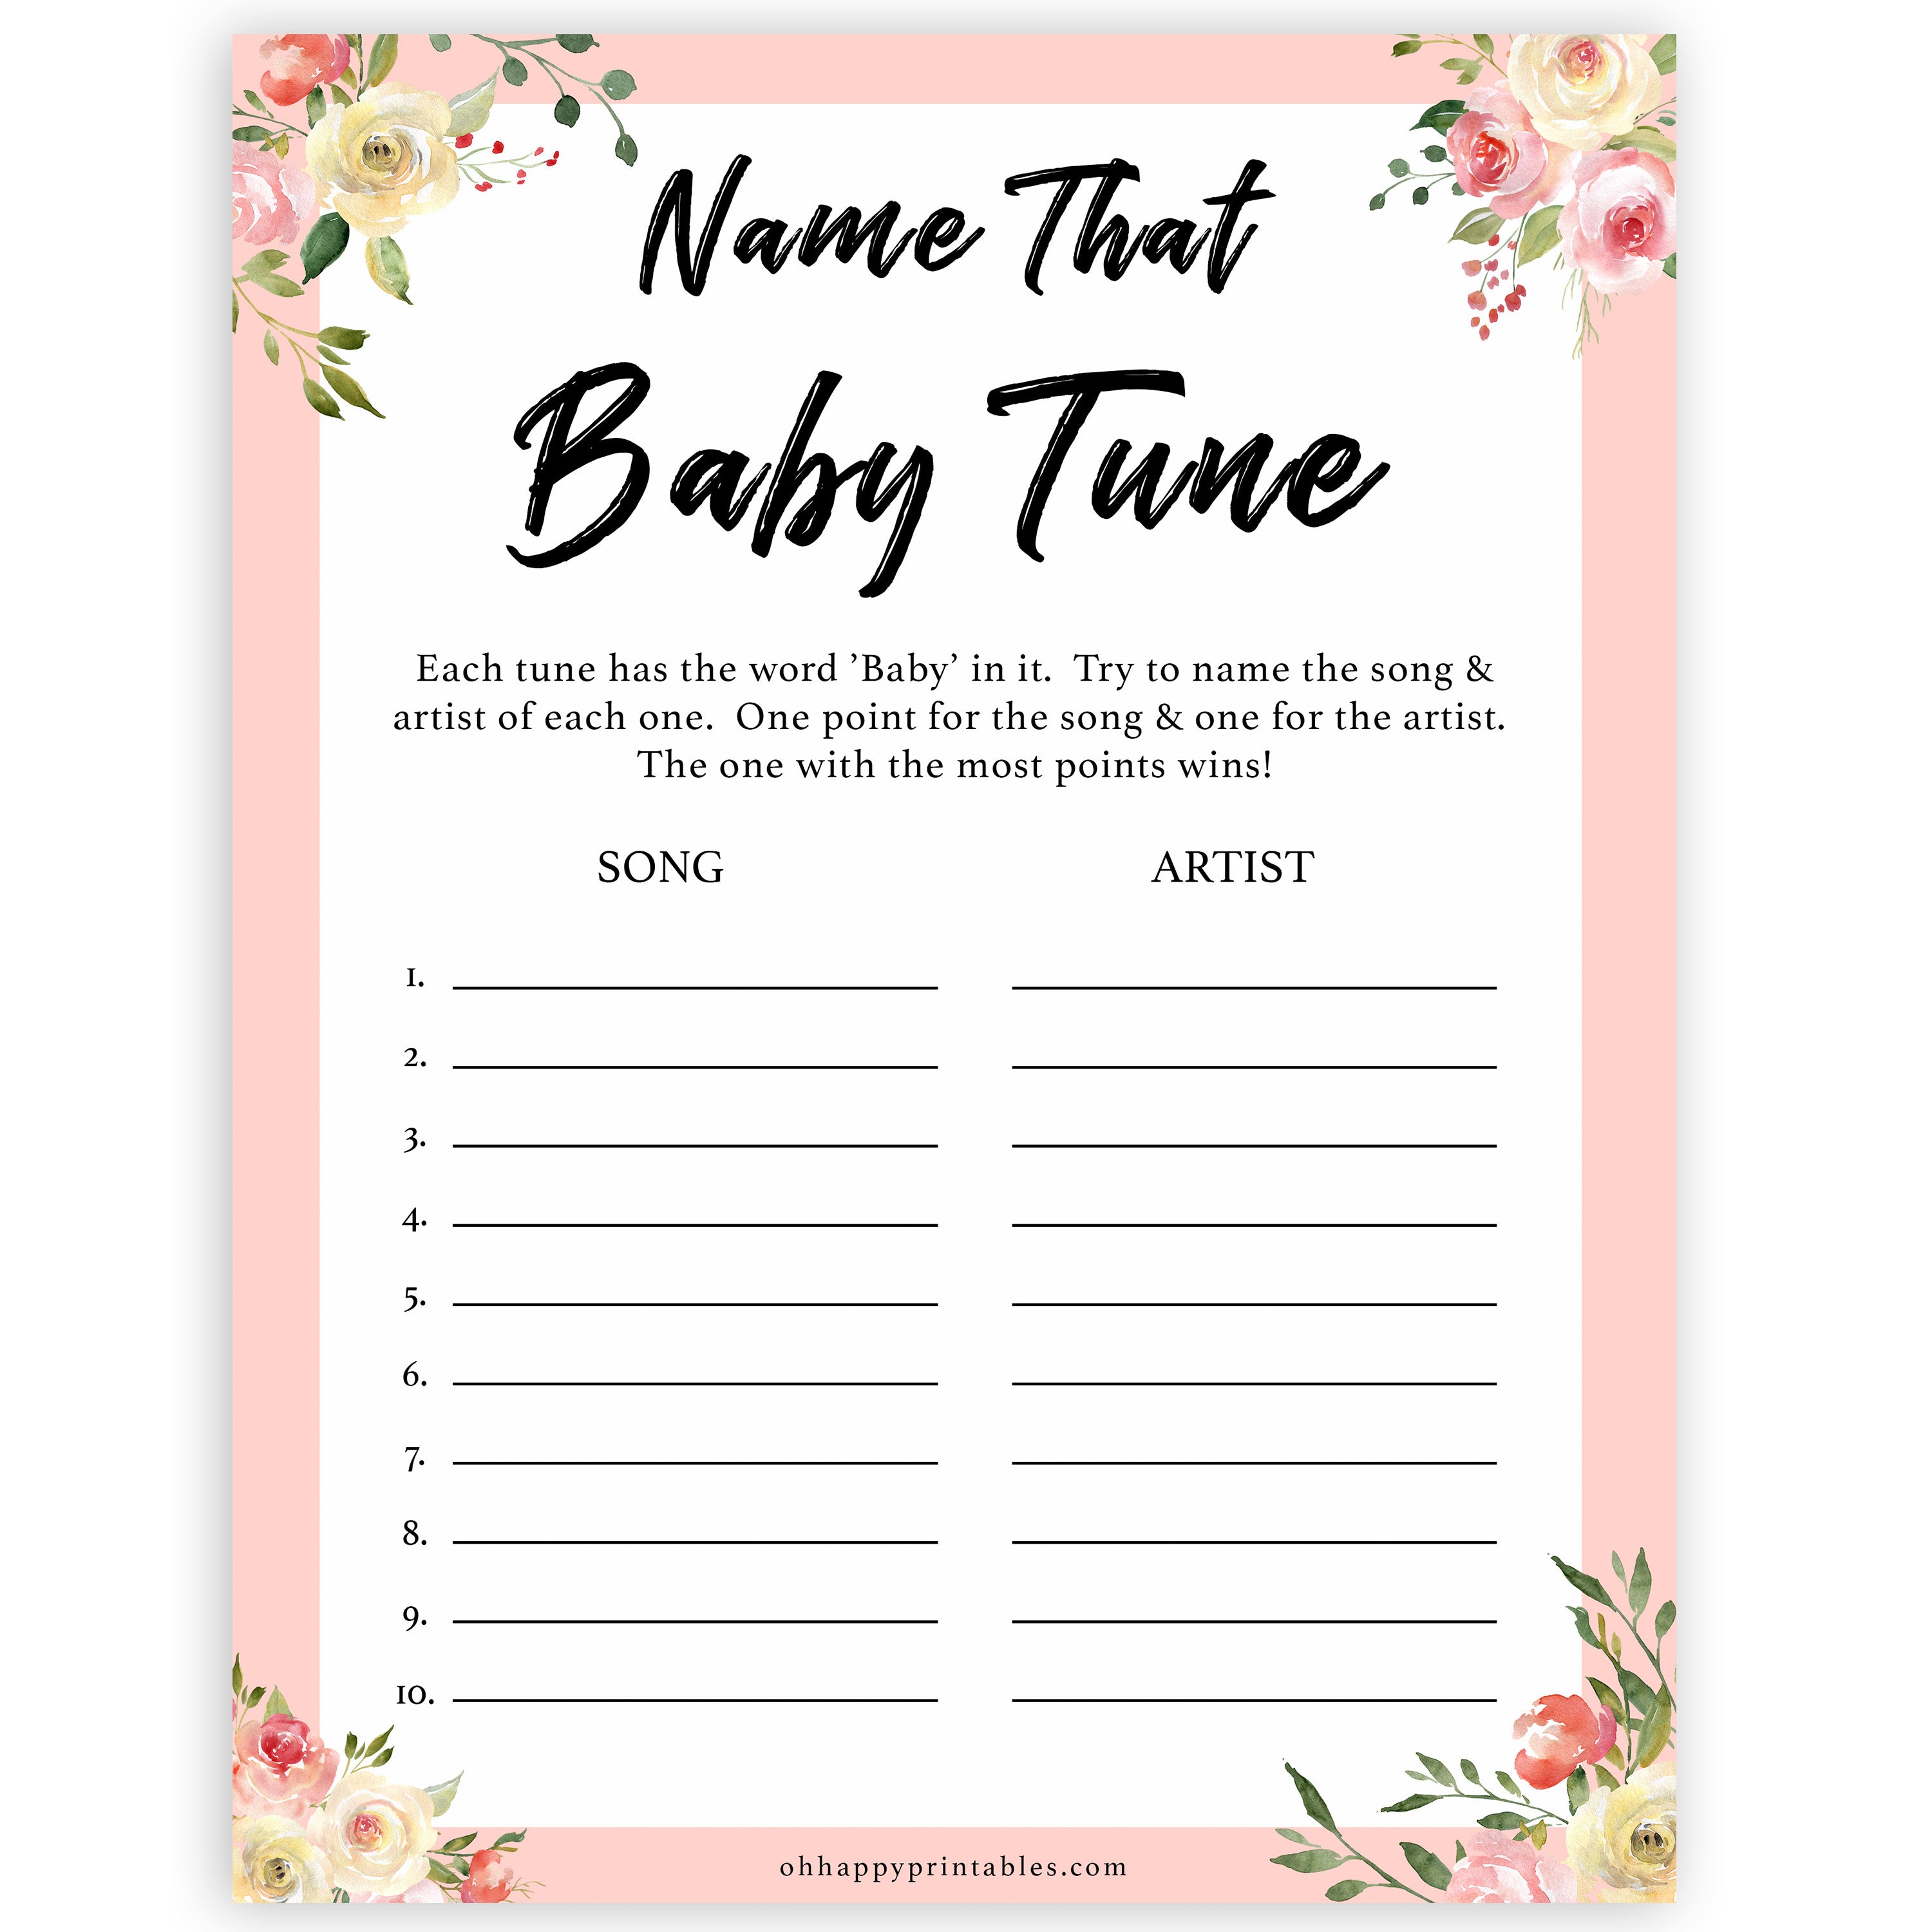 spring floral name that baby tune baby shower games, printable baby shower games, fun baby shower games, baby shower games, popular baby shower games